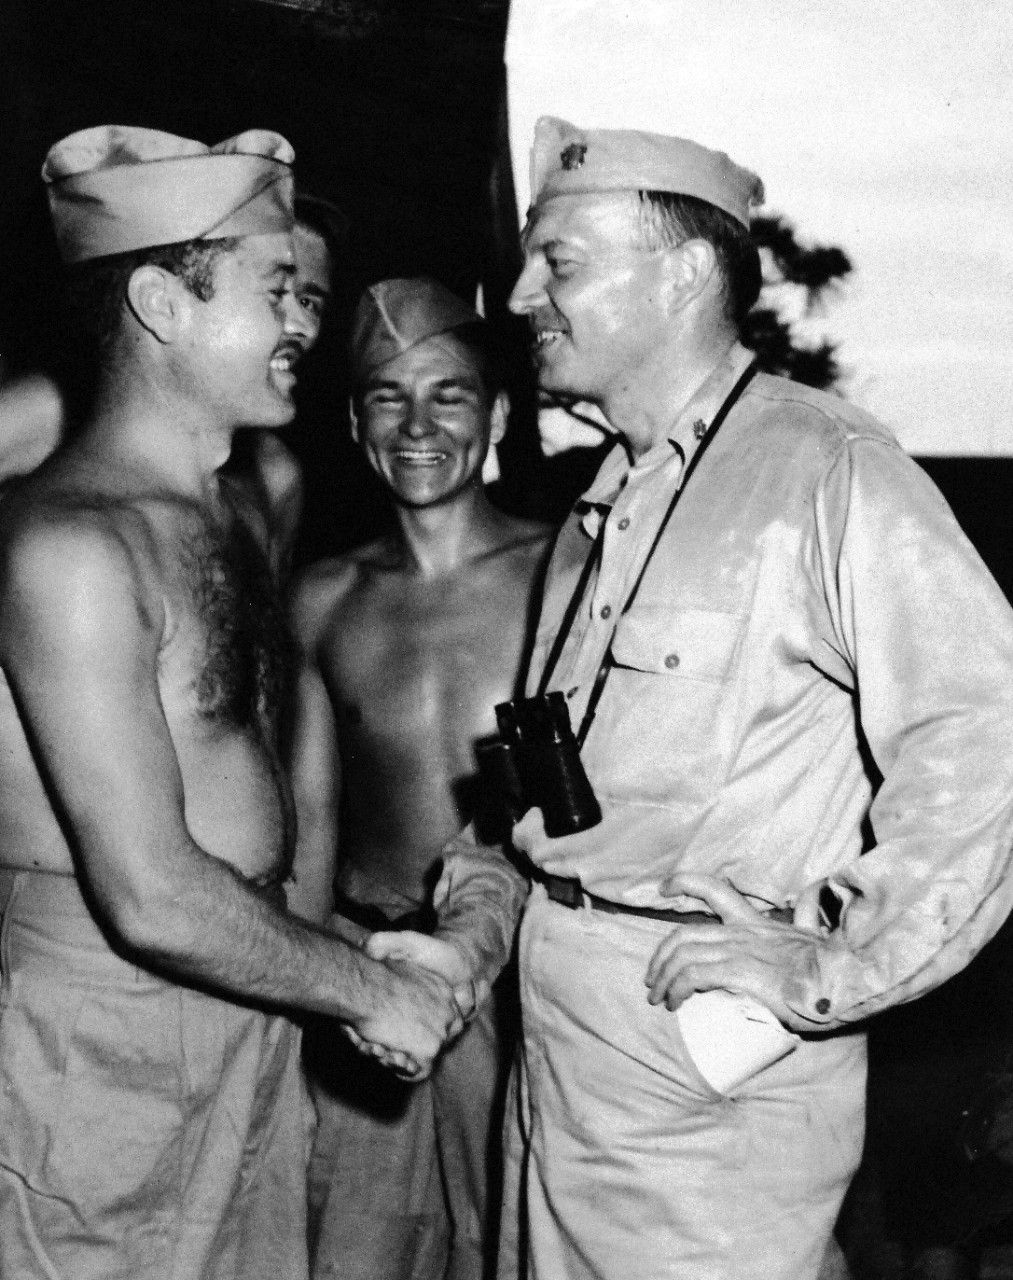 80-G-490443:   Major Gregory “Pappy” Boyington, USMC, 1945.    Boyington, a flying ace, who was reported missing for 16 months, as seen after his rescue from prison camp hospital at Omori near Tokyo.  Shown:  Commander Harold E. Stassen, right of the staff of Admiral William F. Halsey, USN, greets the Major.  Boyington later received the Medal of Honor for his actions during the war.   Photograph dated August 29, 1945.  Official U.S. Navy photograph, now in the collection of the National Archives.   (2015/11/10).